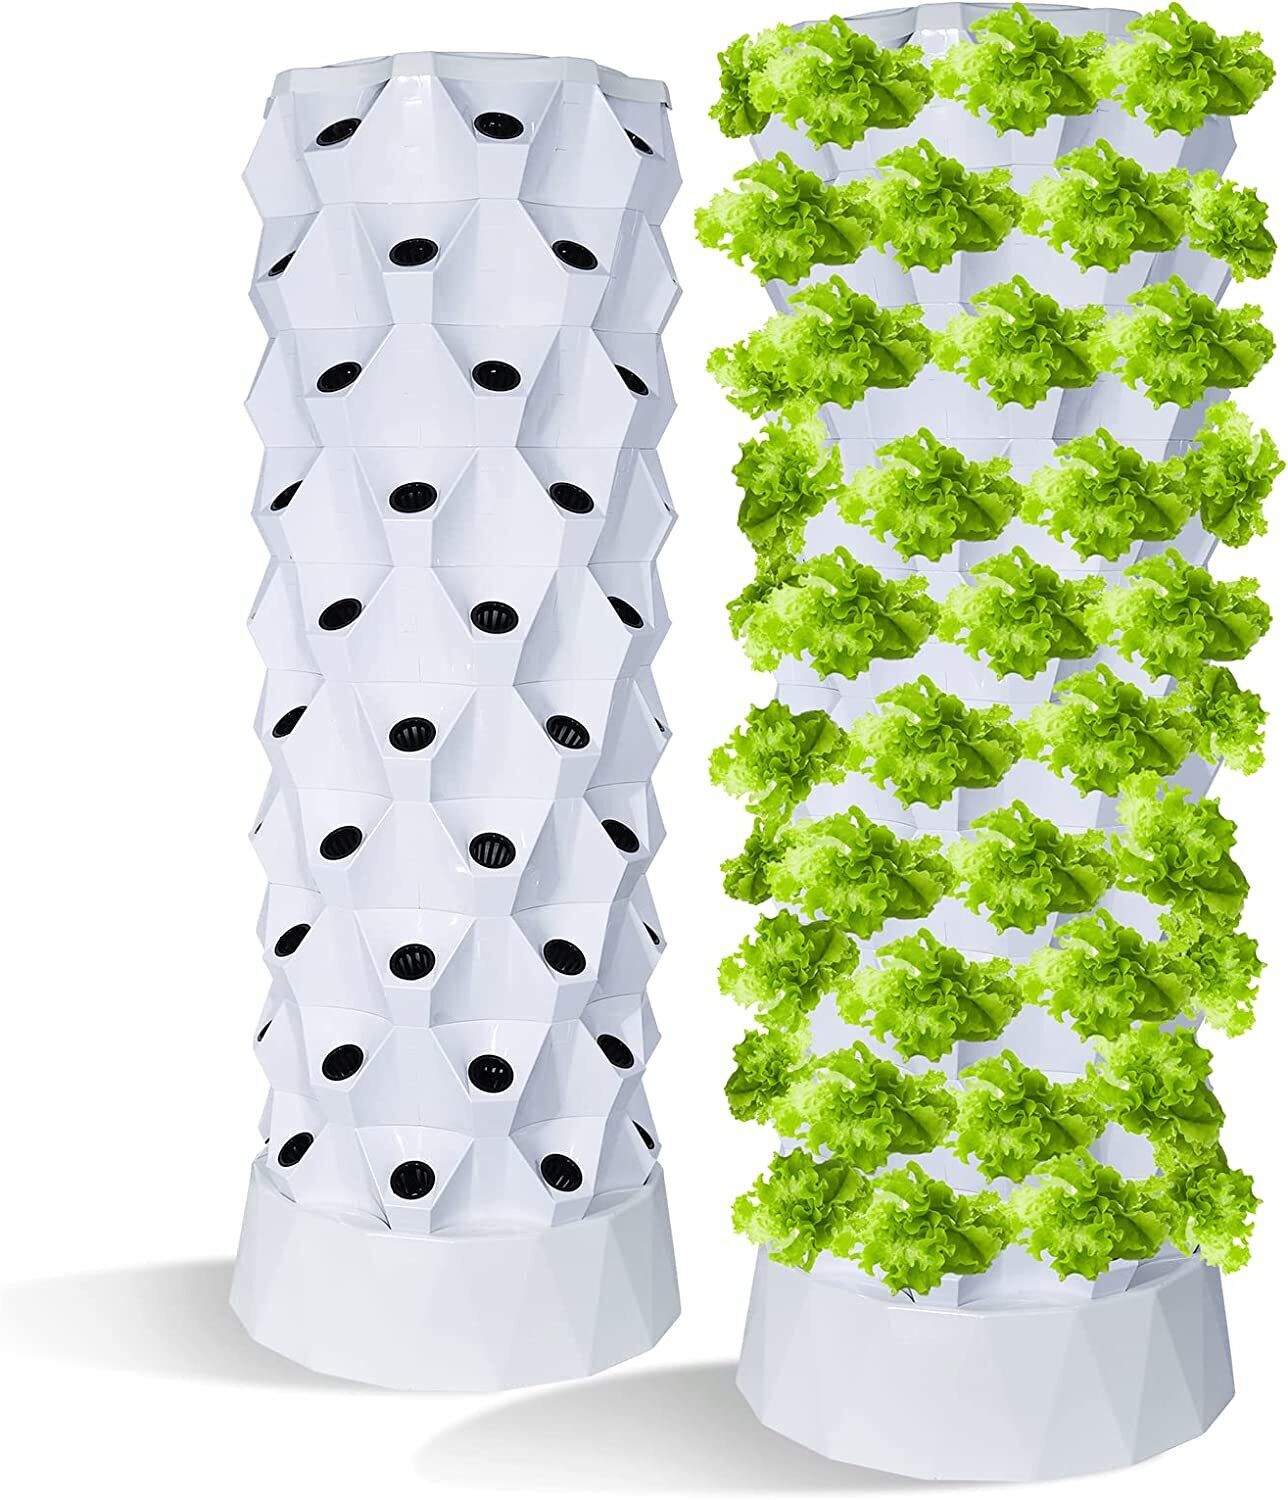 80-Port Vertical Hydroponic Tower 30L Home Garden Hydroponic Growing System kit